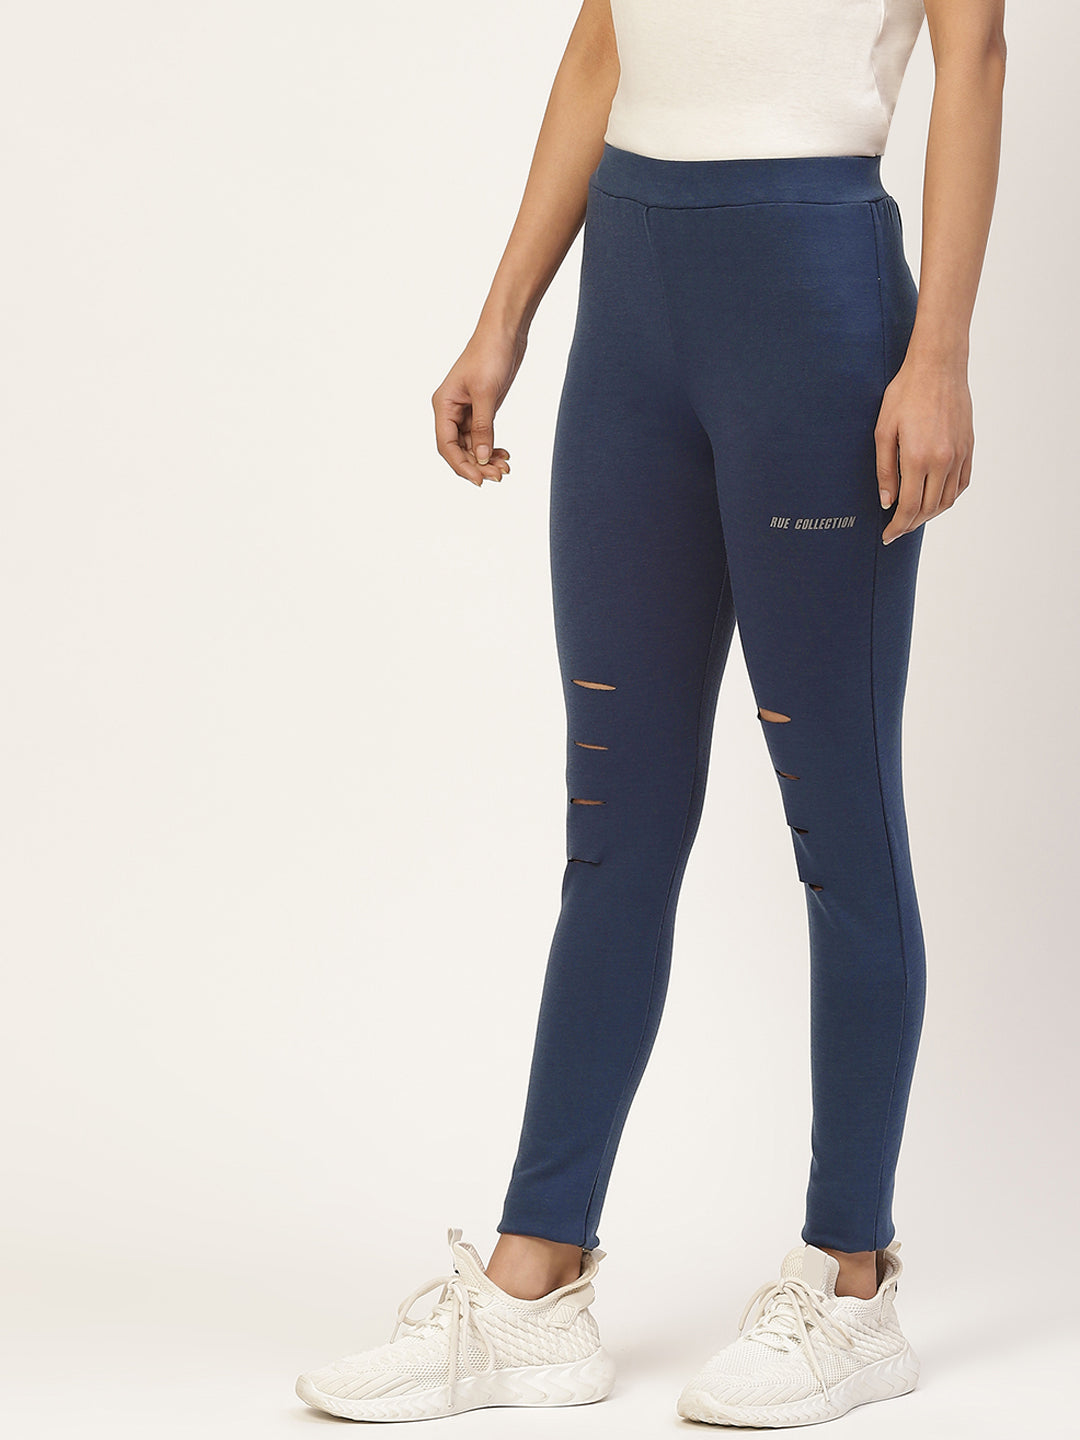 Women Blue Solid Ankle Length Skinny Fit Jeggings